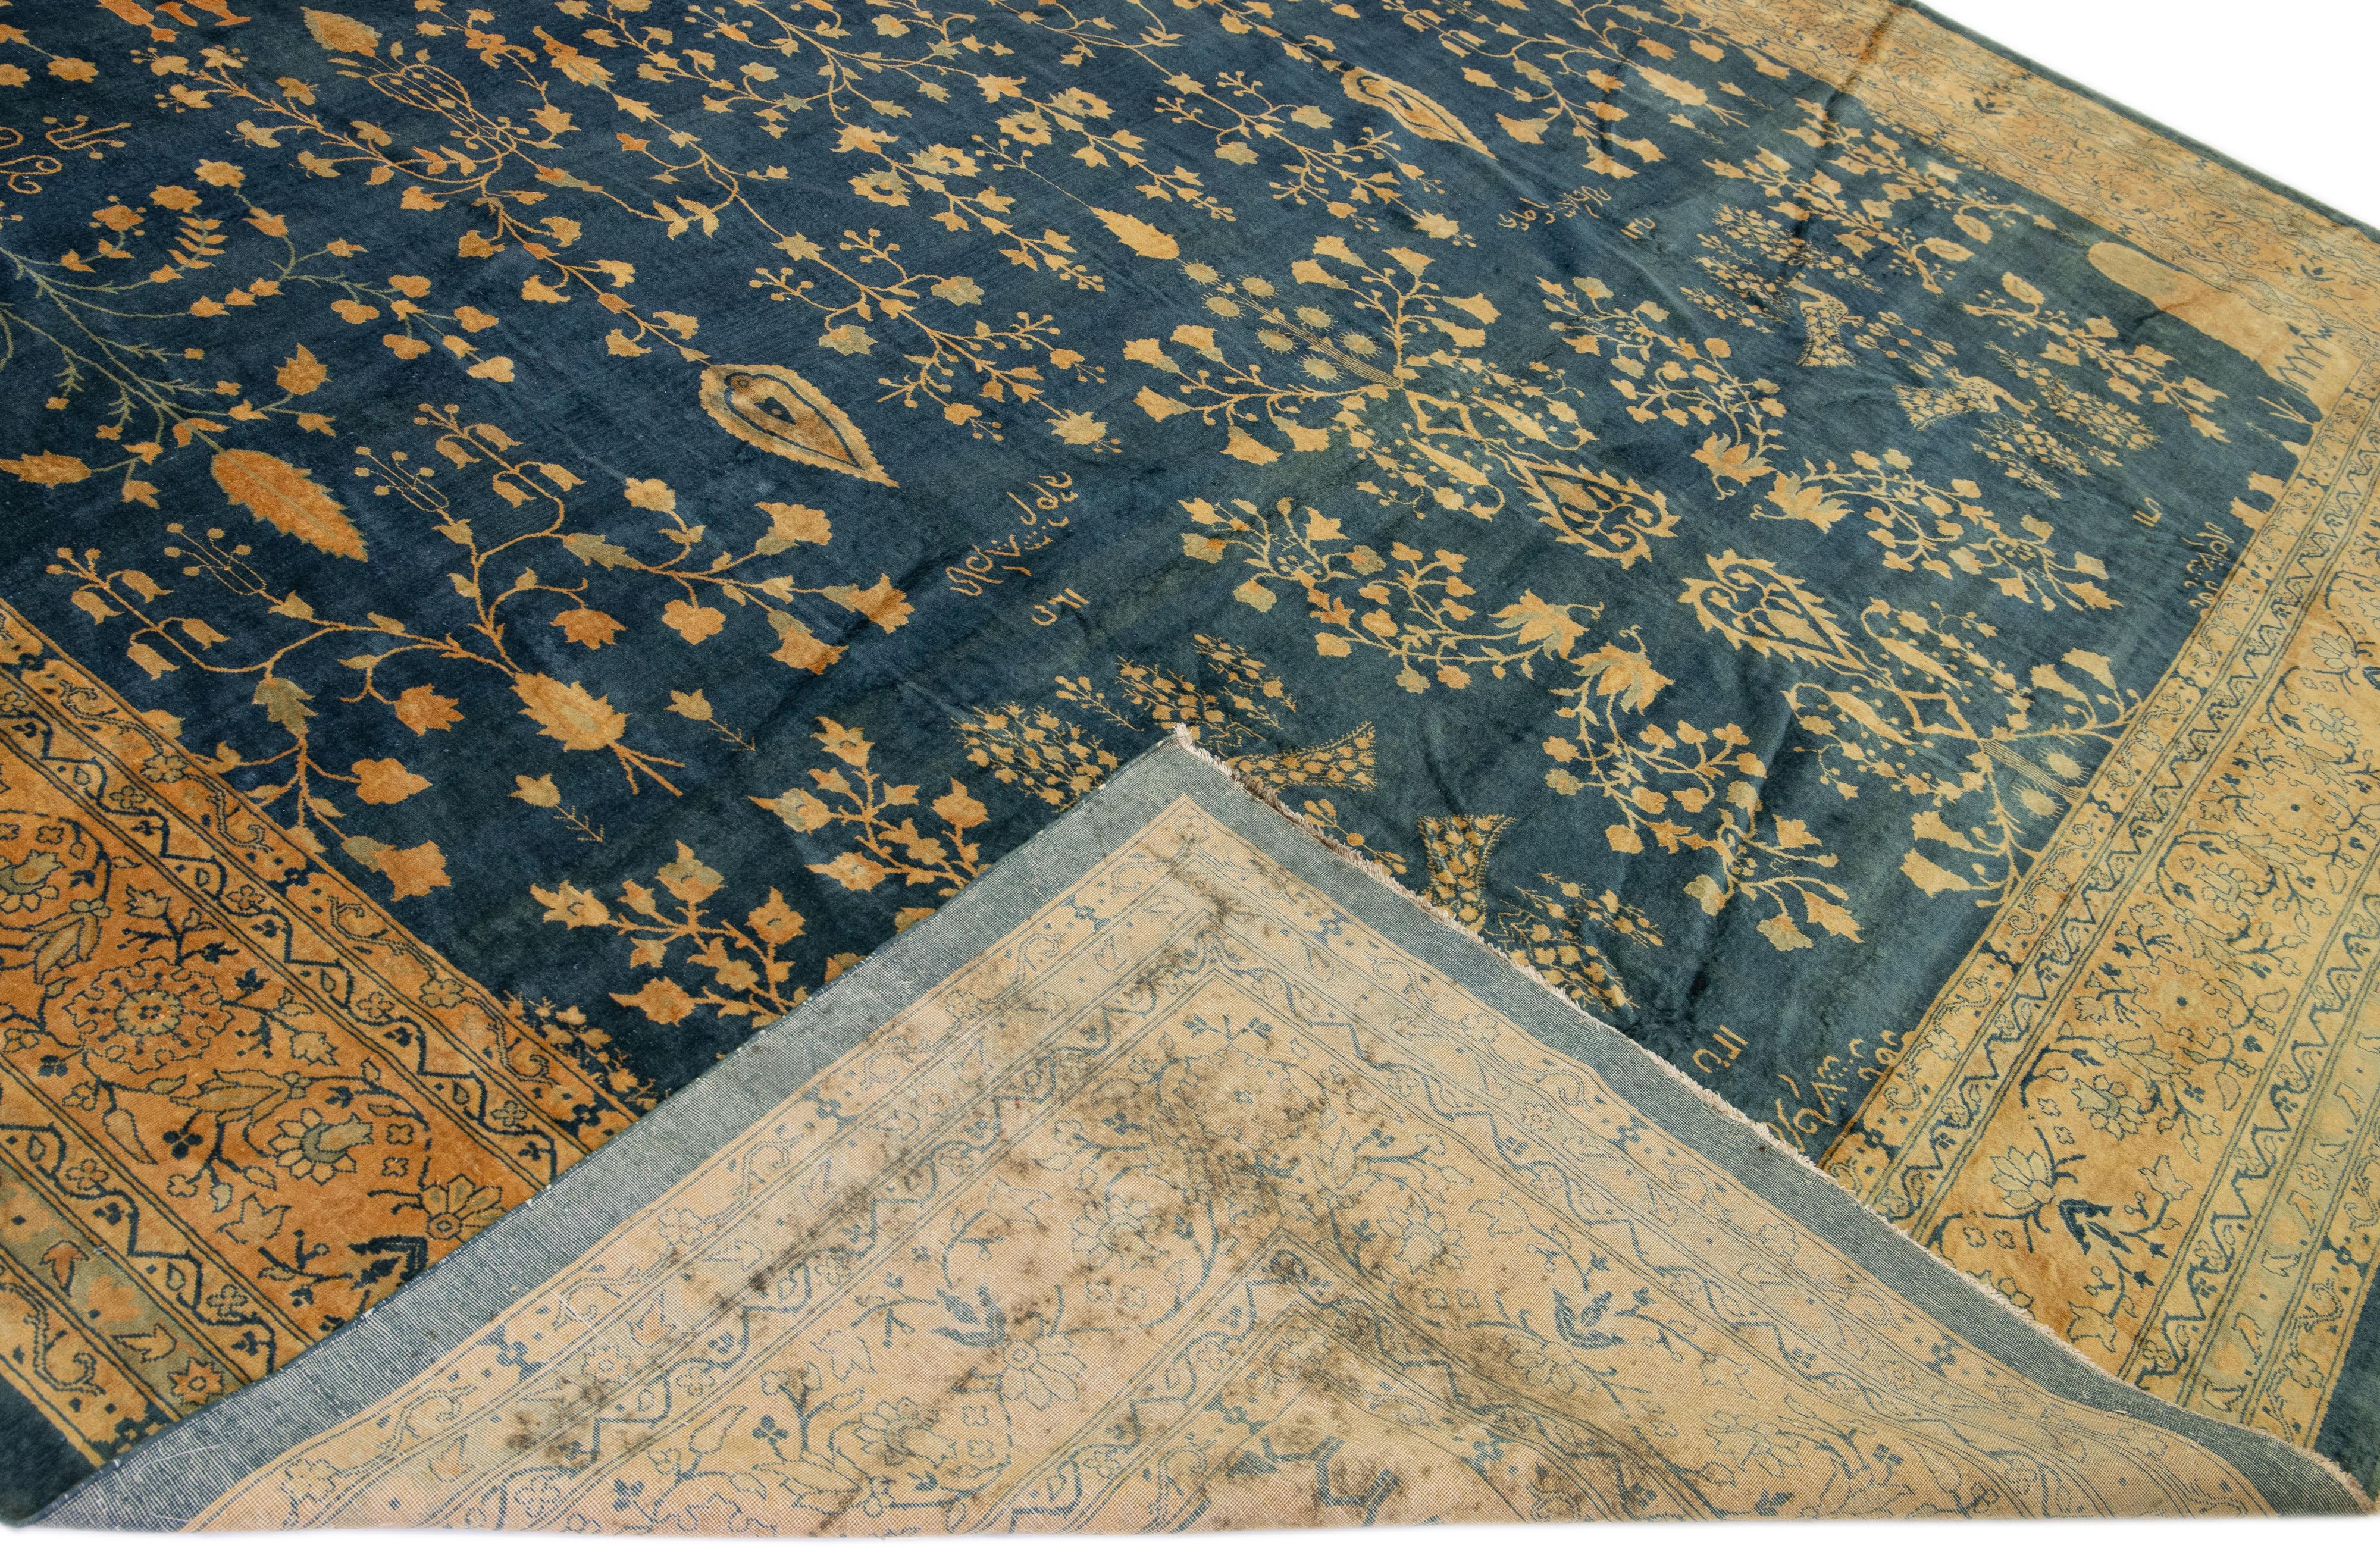 Beautiful antique Kerman hand-knotted wool rug with a navy blue field. This Persian rug has a beige frame and tan accents in a gorgeous all-over rosette pattern design.

This rug measures: 13' x 23'6